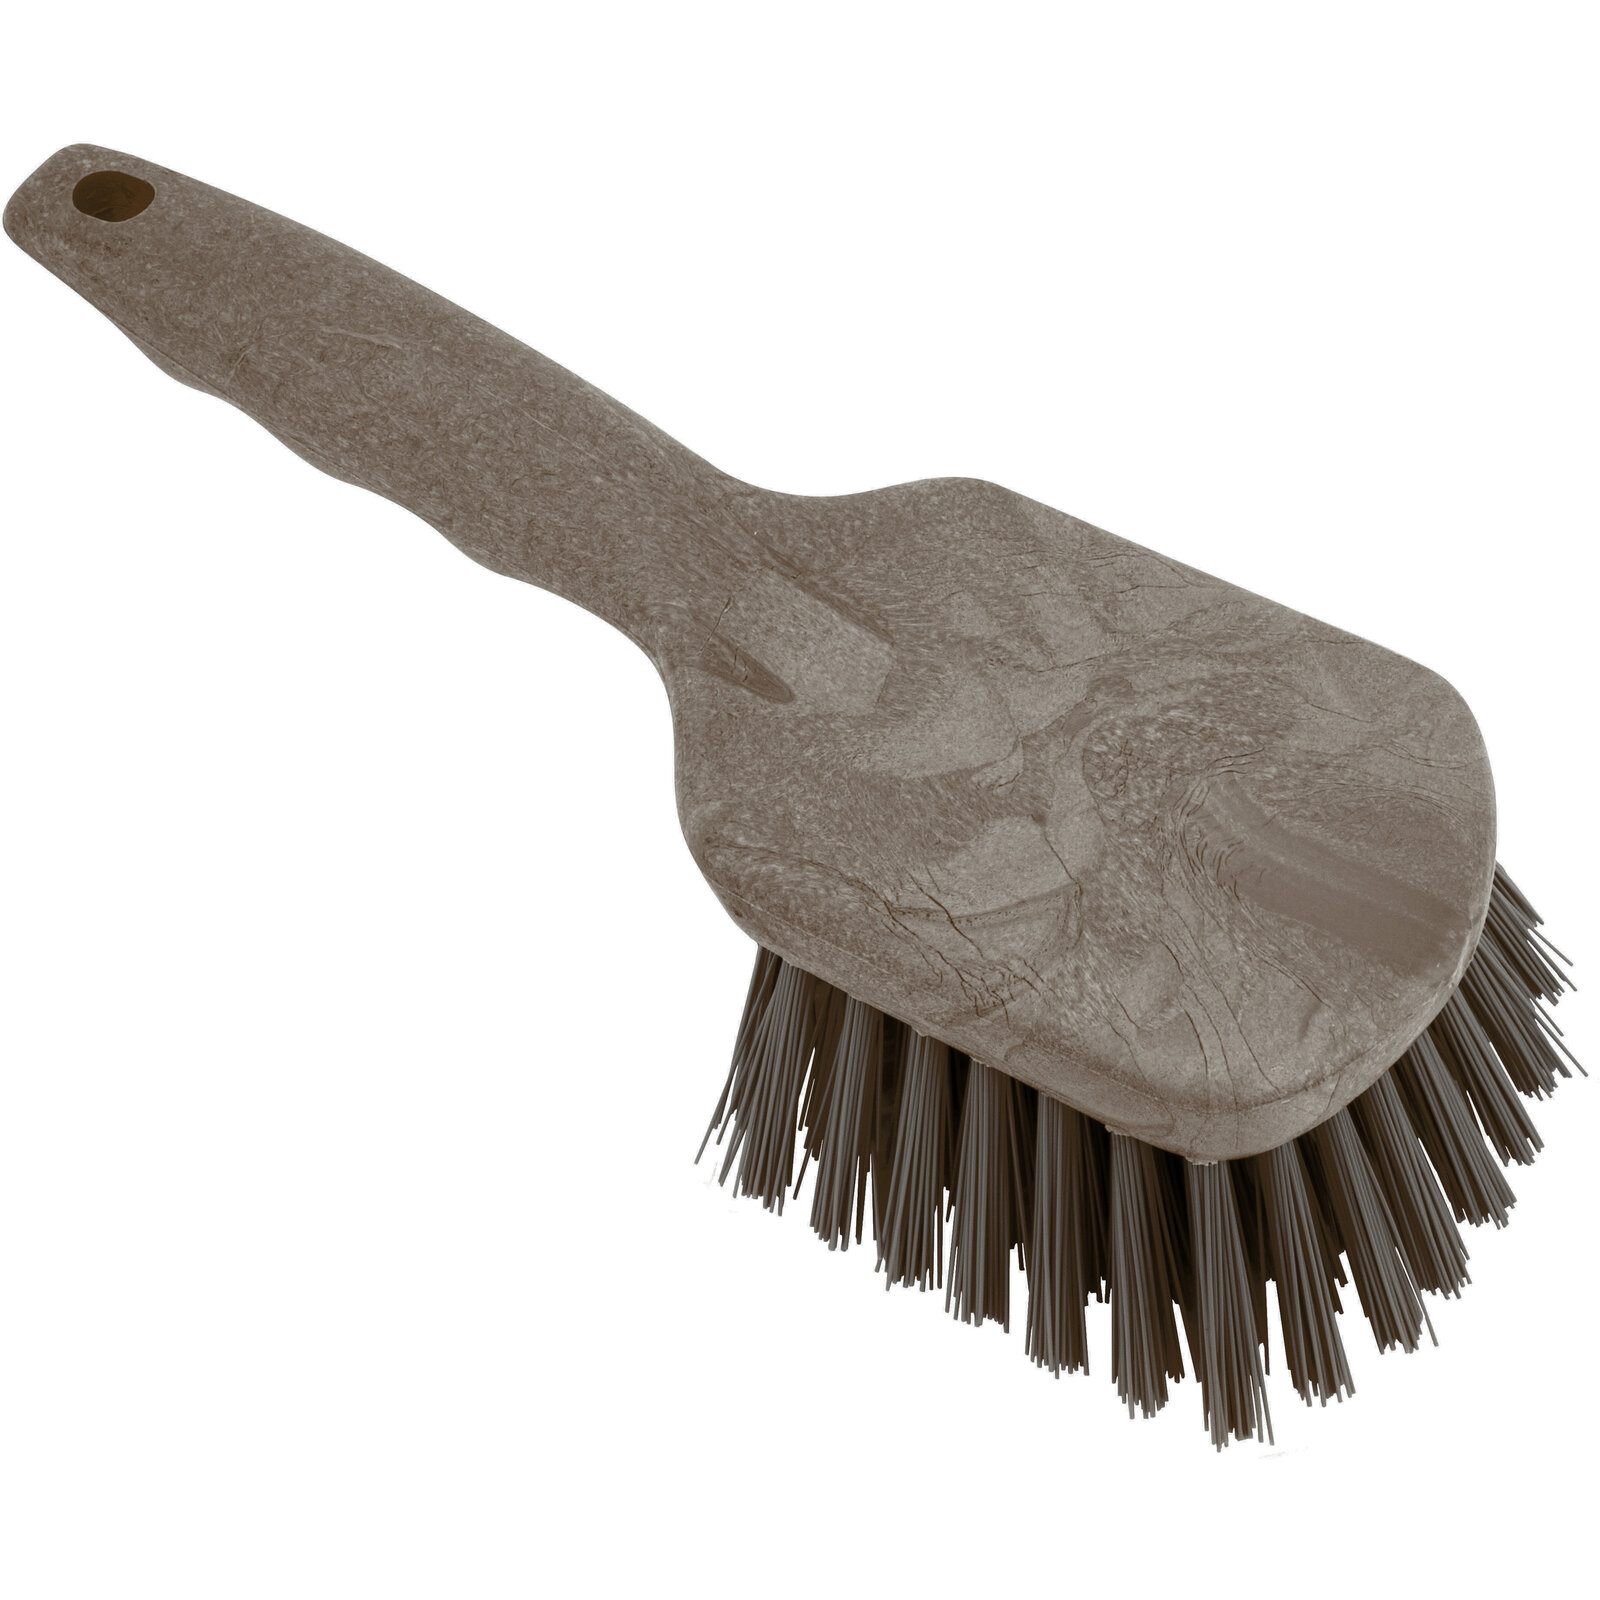 Sparta Tile and Grout Brush - Bunzl Processor Division